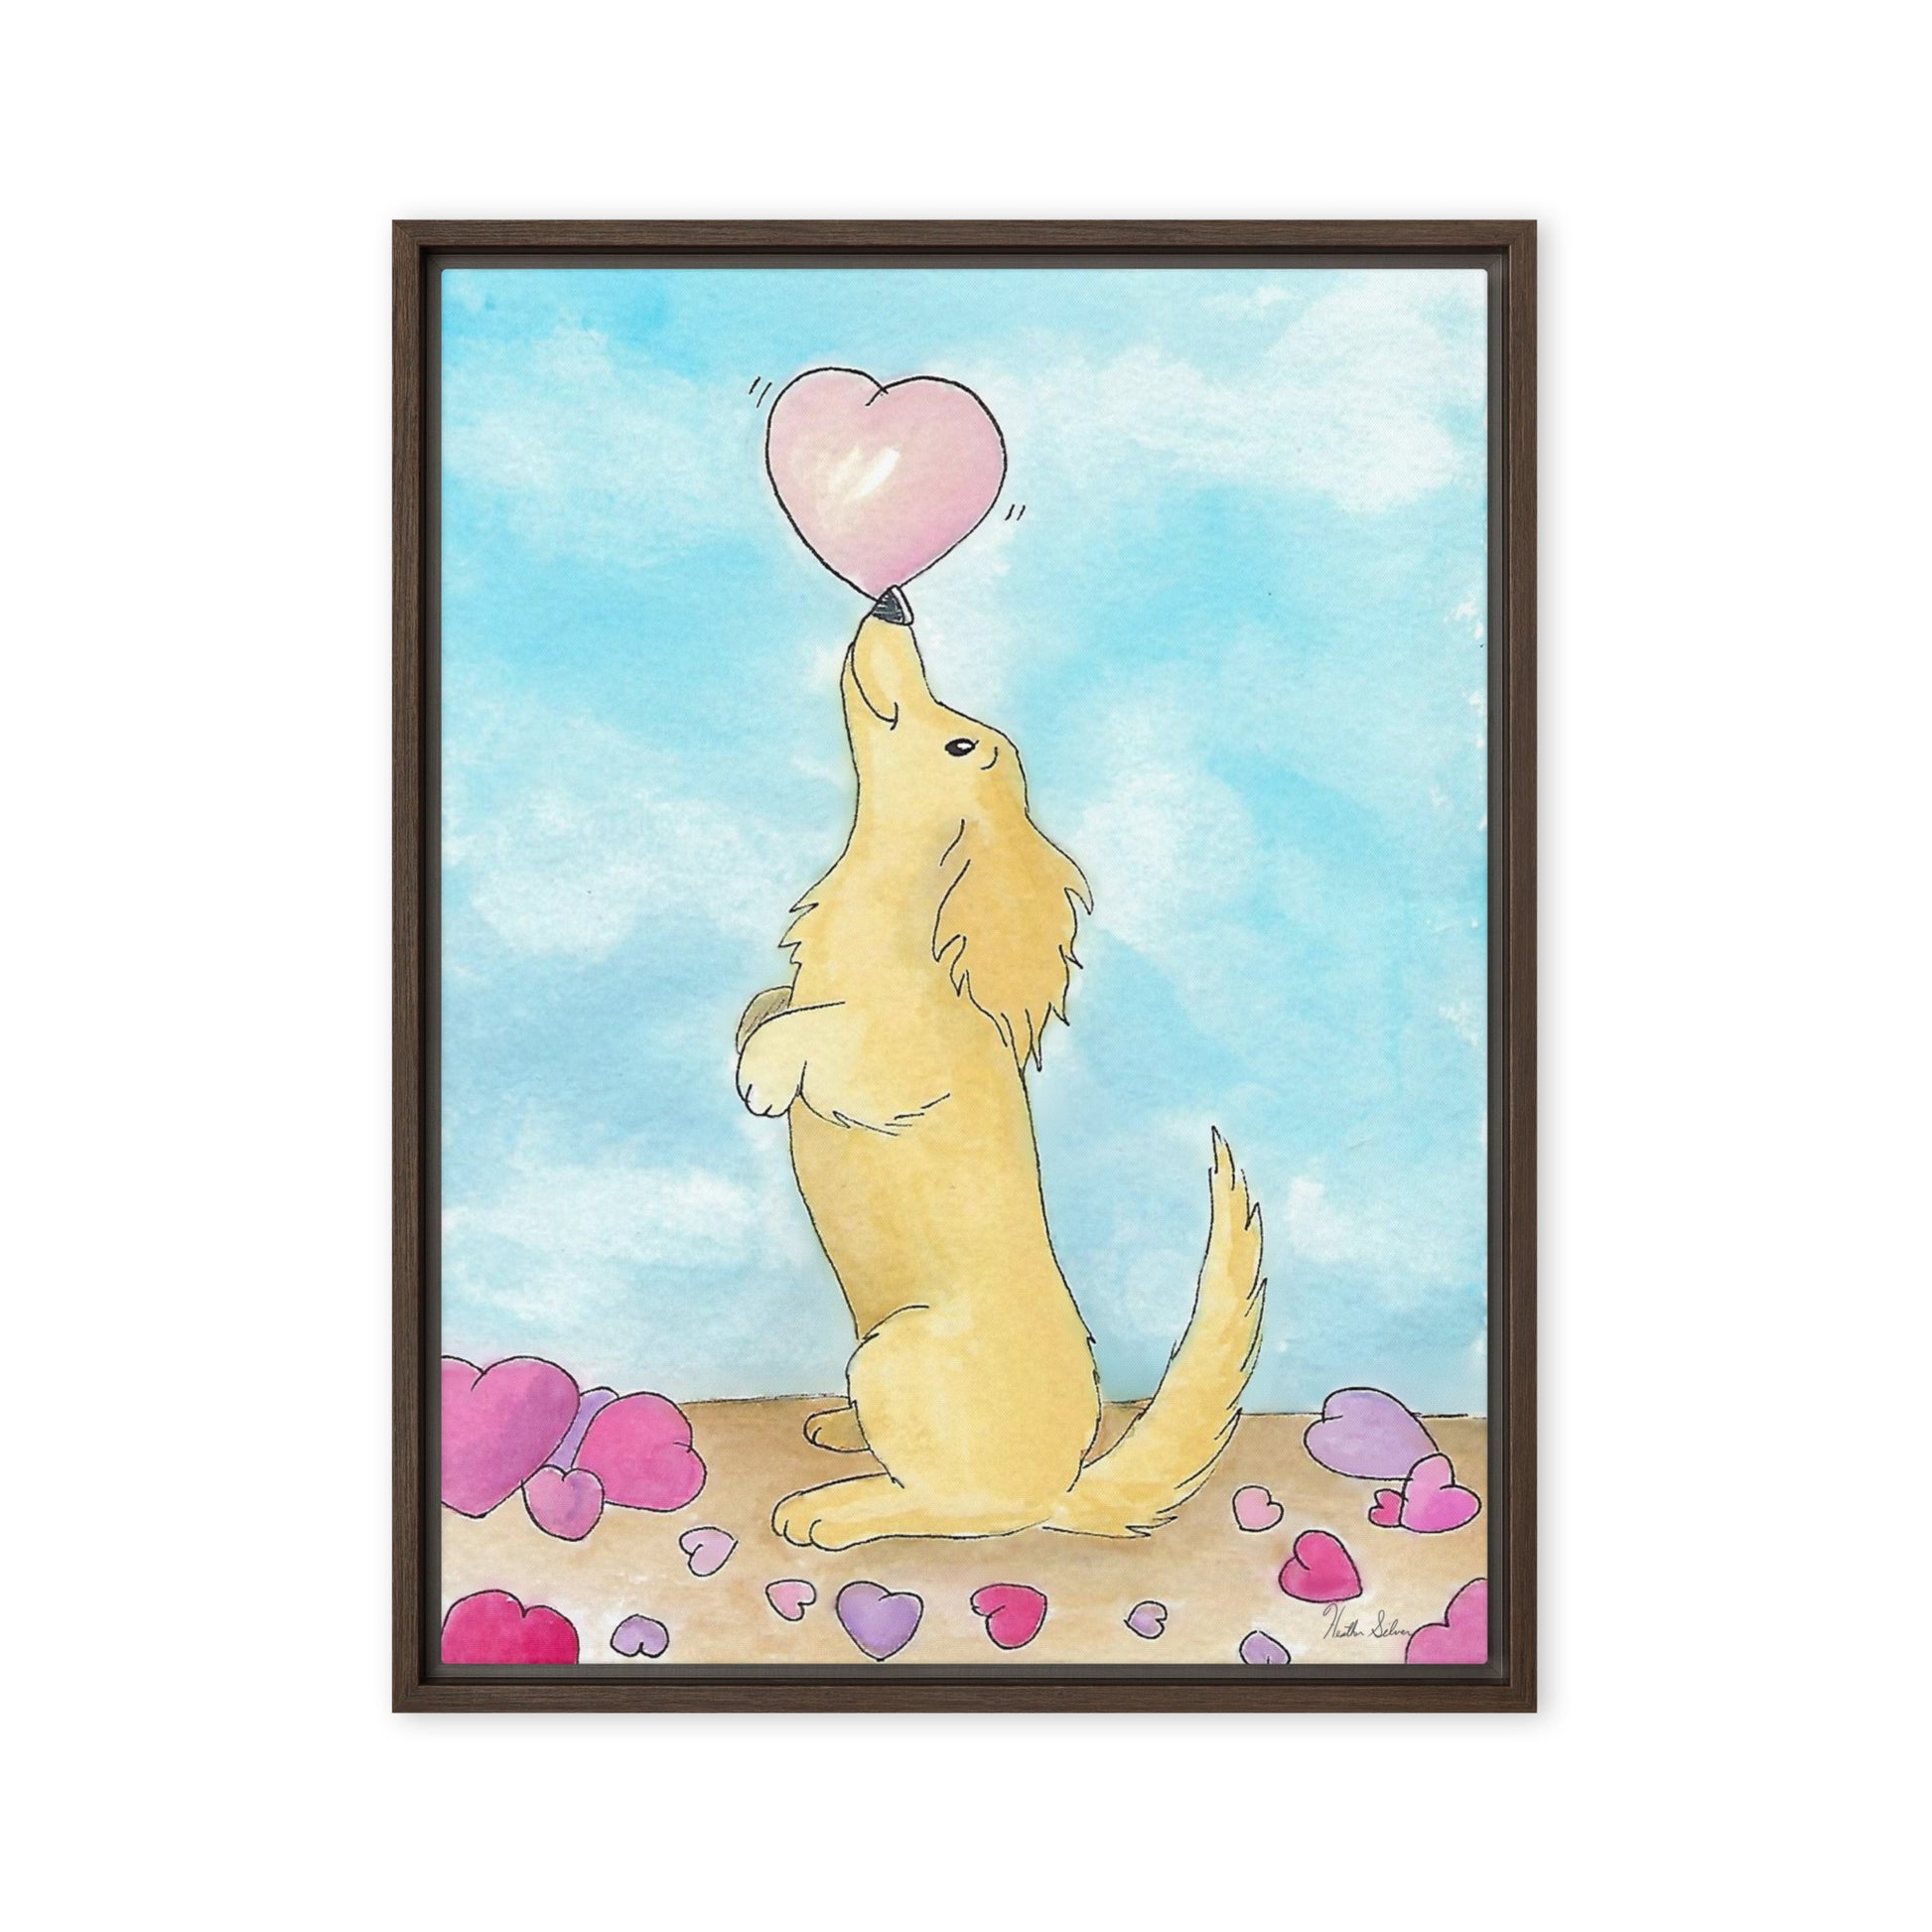 24 by 32 inch framed canvas Puppy Love print. The canvas is in a brown pine wood frame.